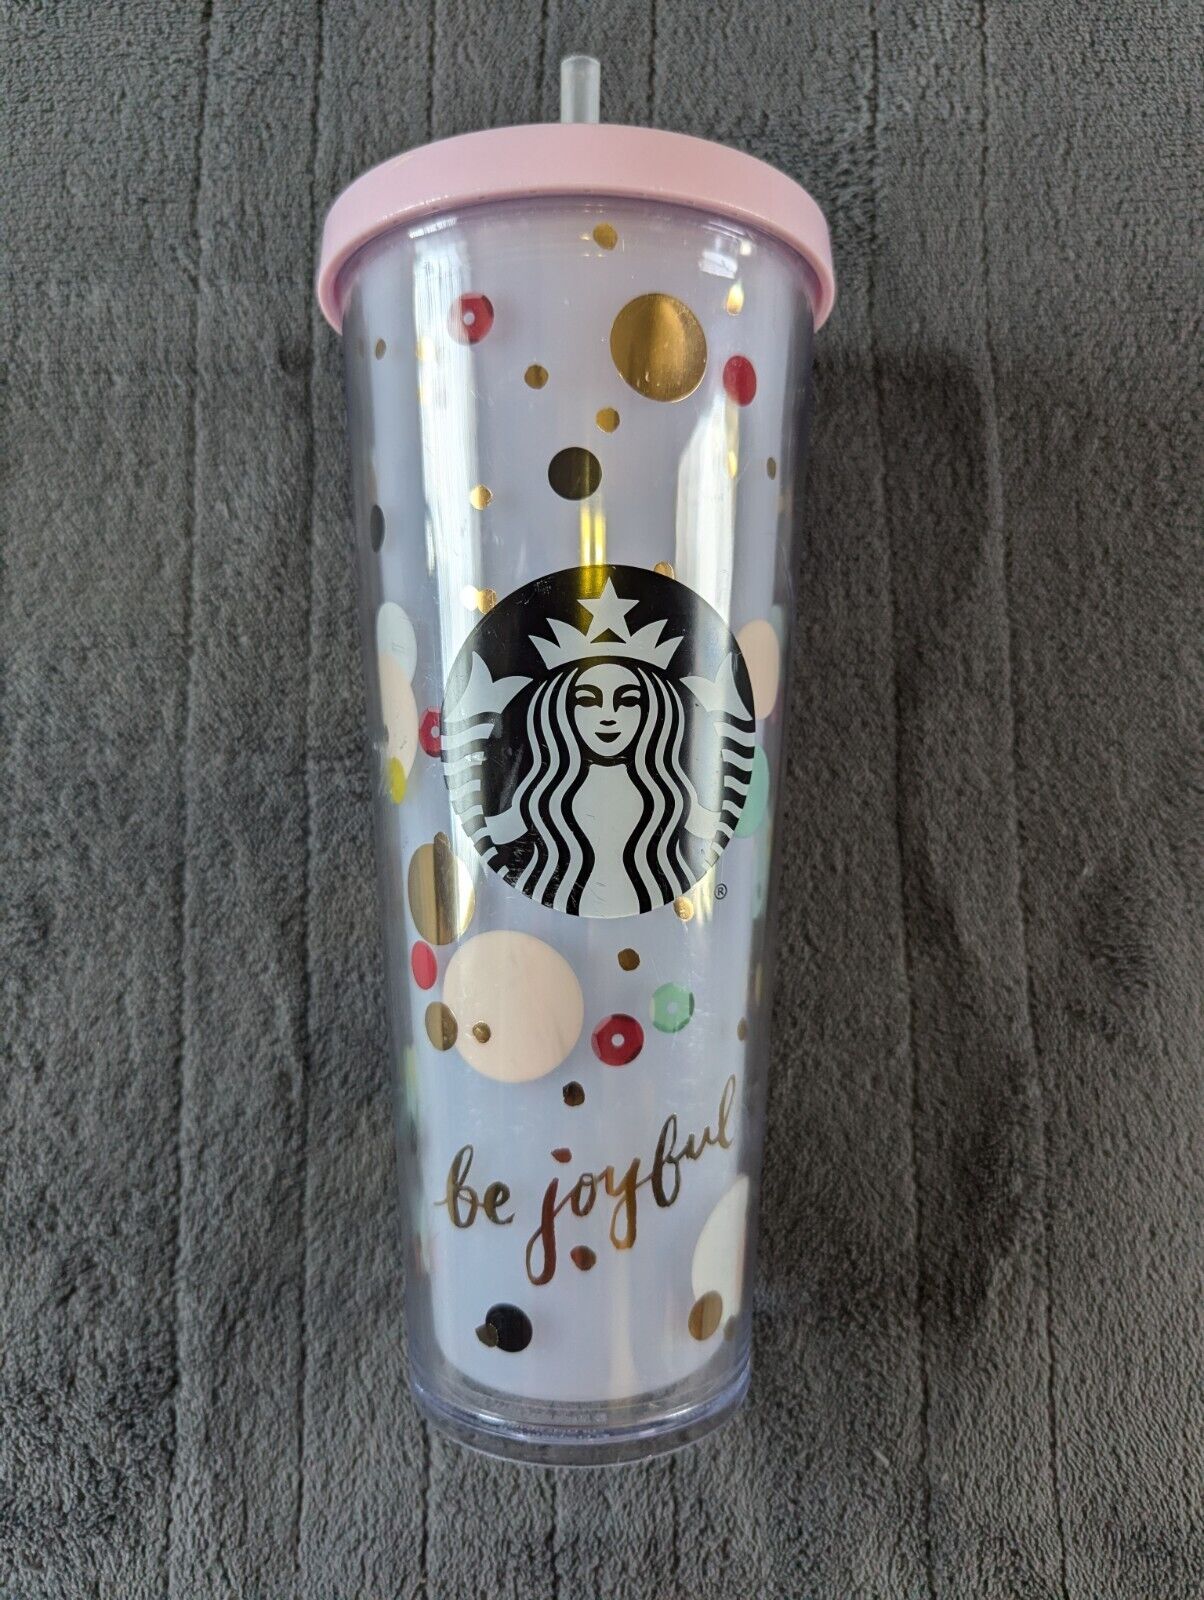 Starbucks Be Joyful, Venti Tumbler/ Cold Cup Colorful Dots Coffee/Tea Excellent